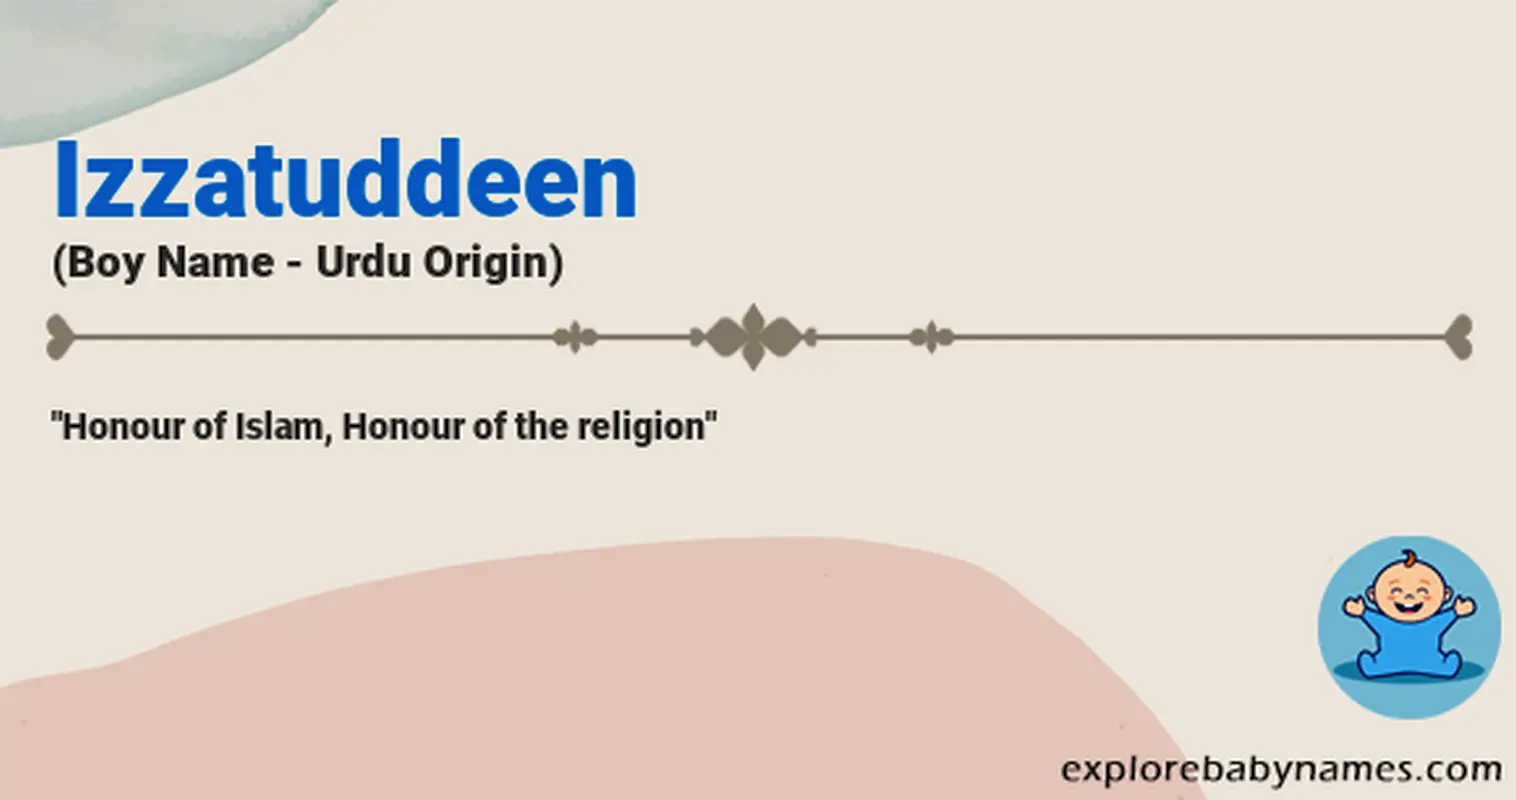 Meaning of Izzatuddeen